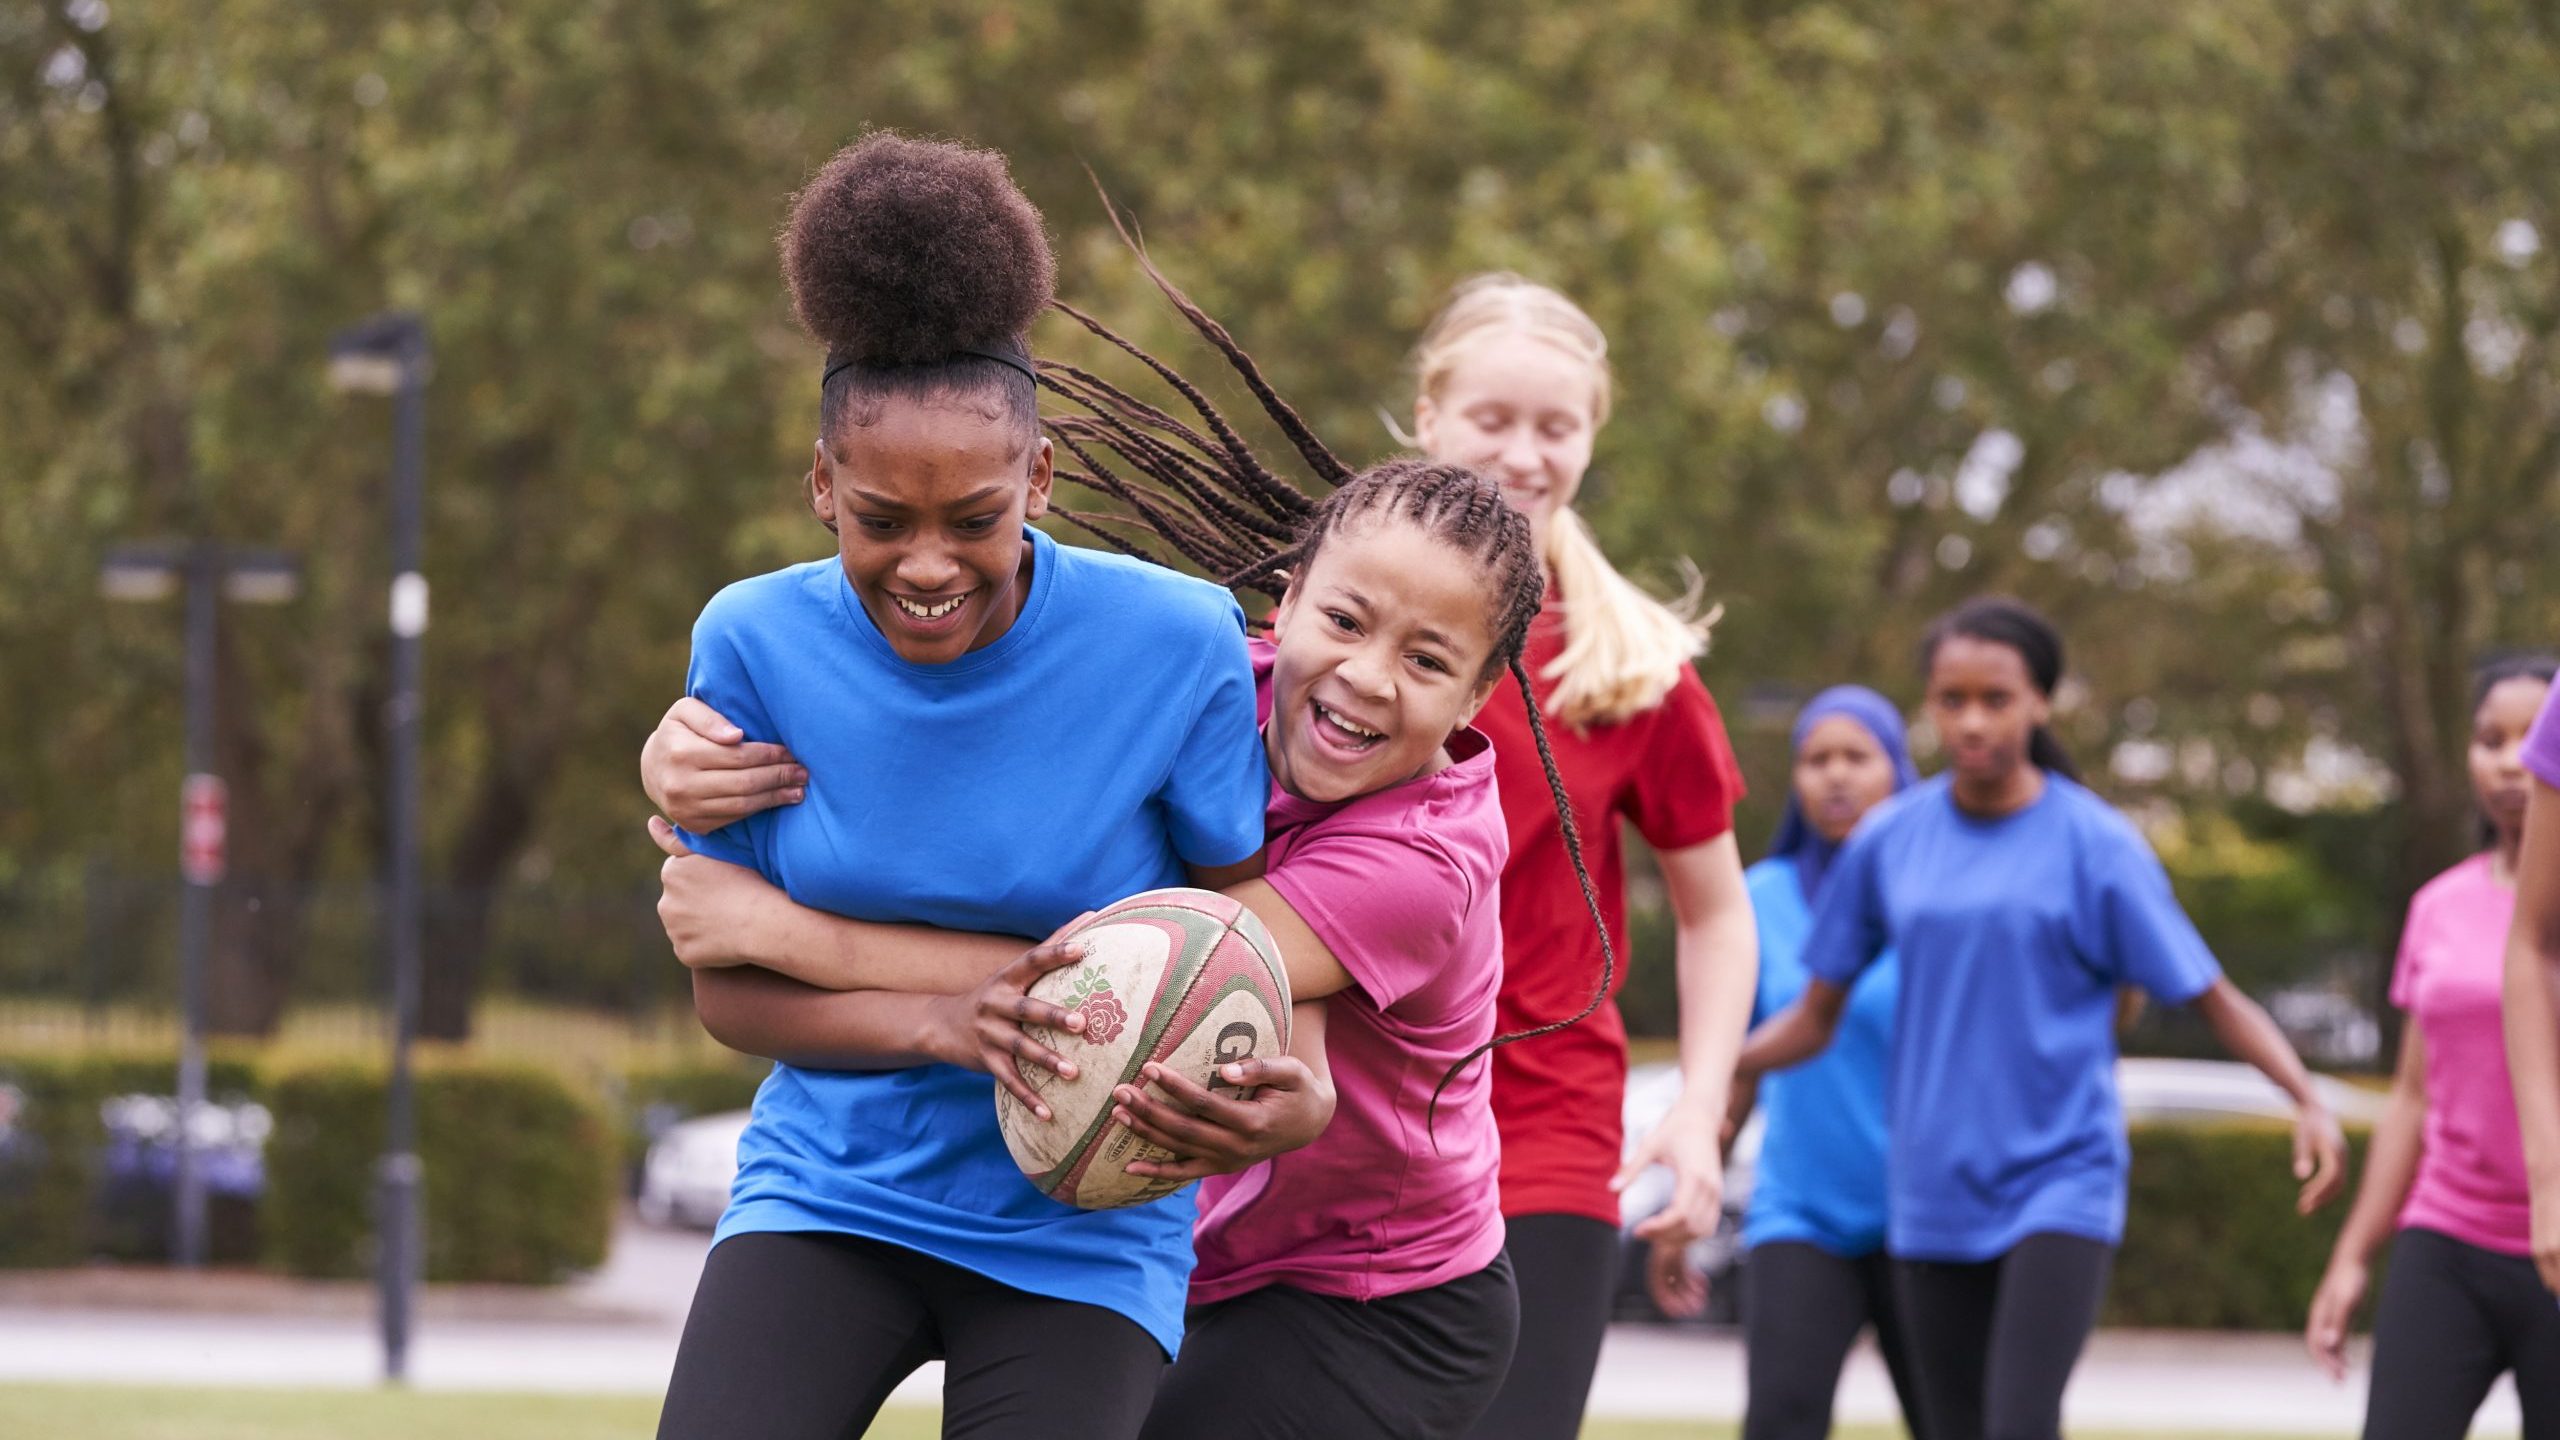 A group of high school girls playing rugby, two black girls tackling with smiles on their faces